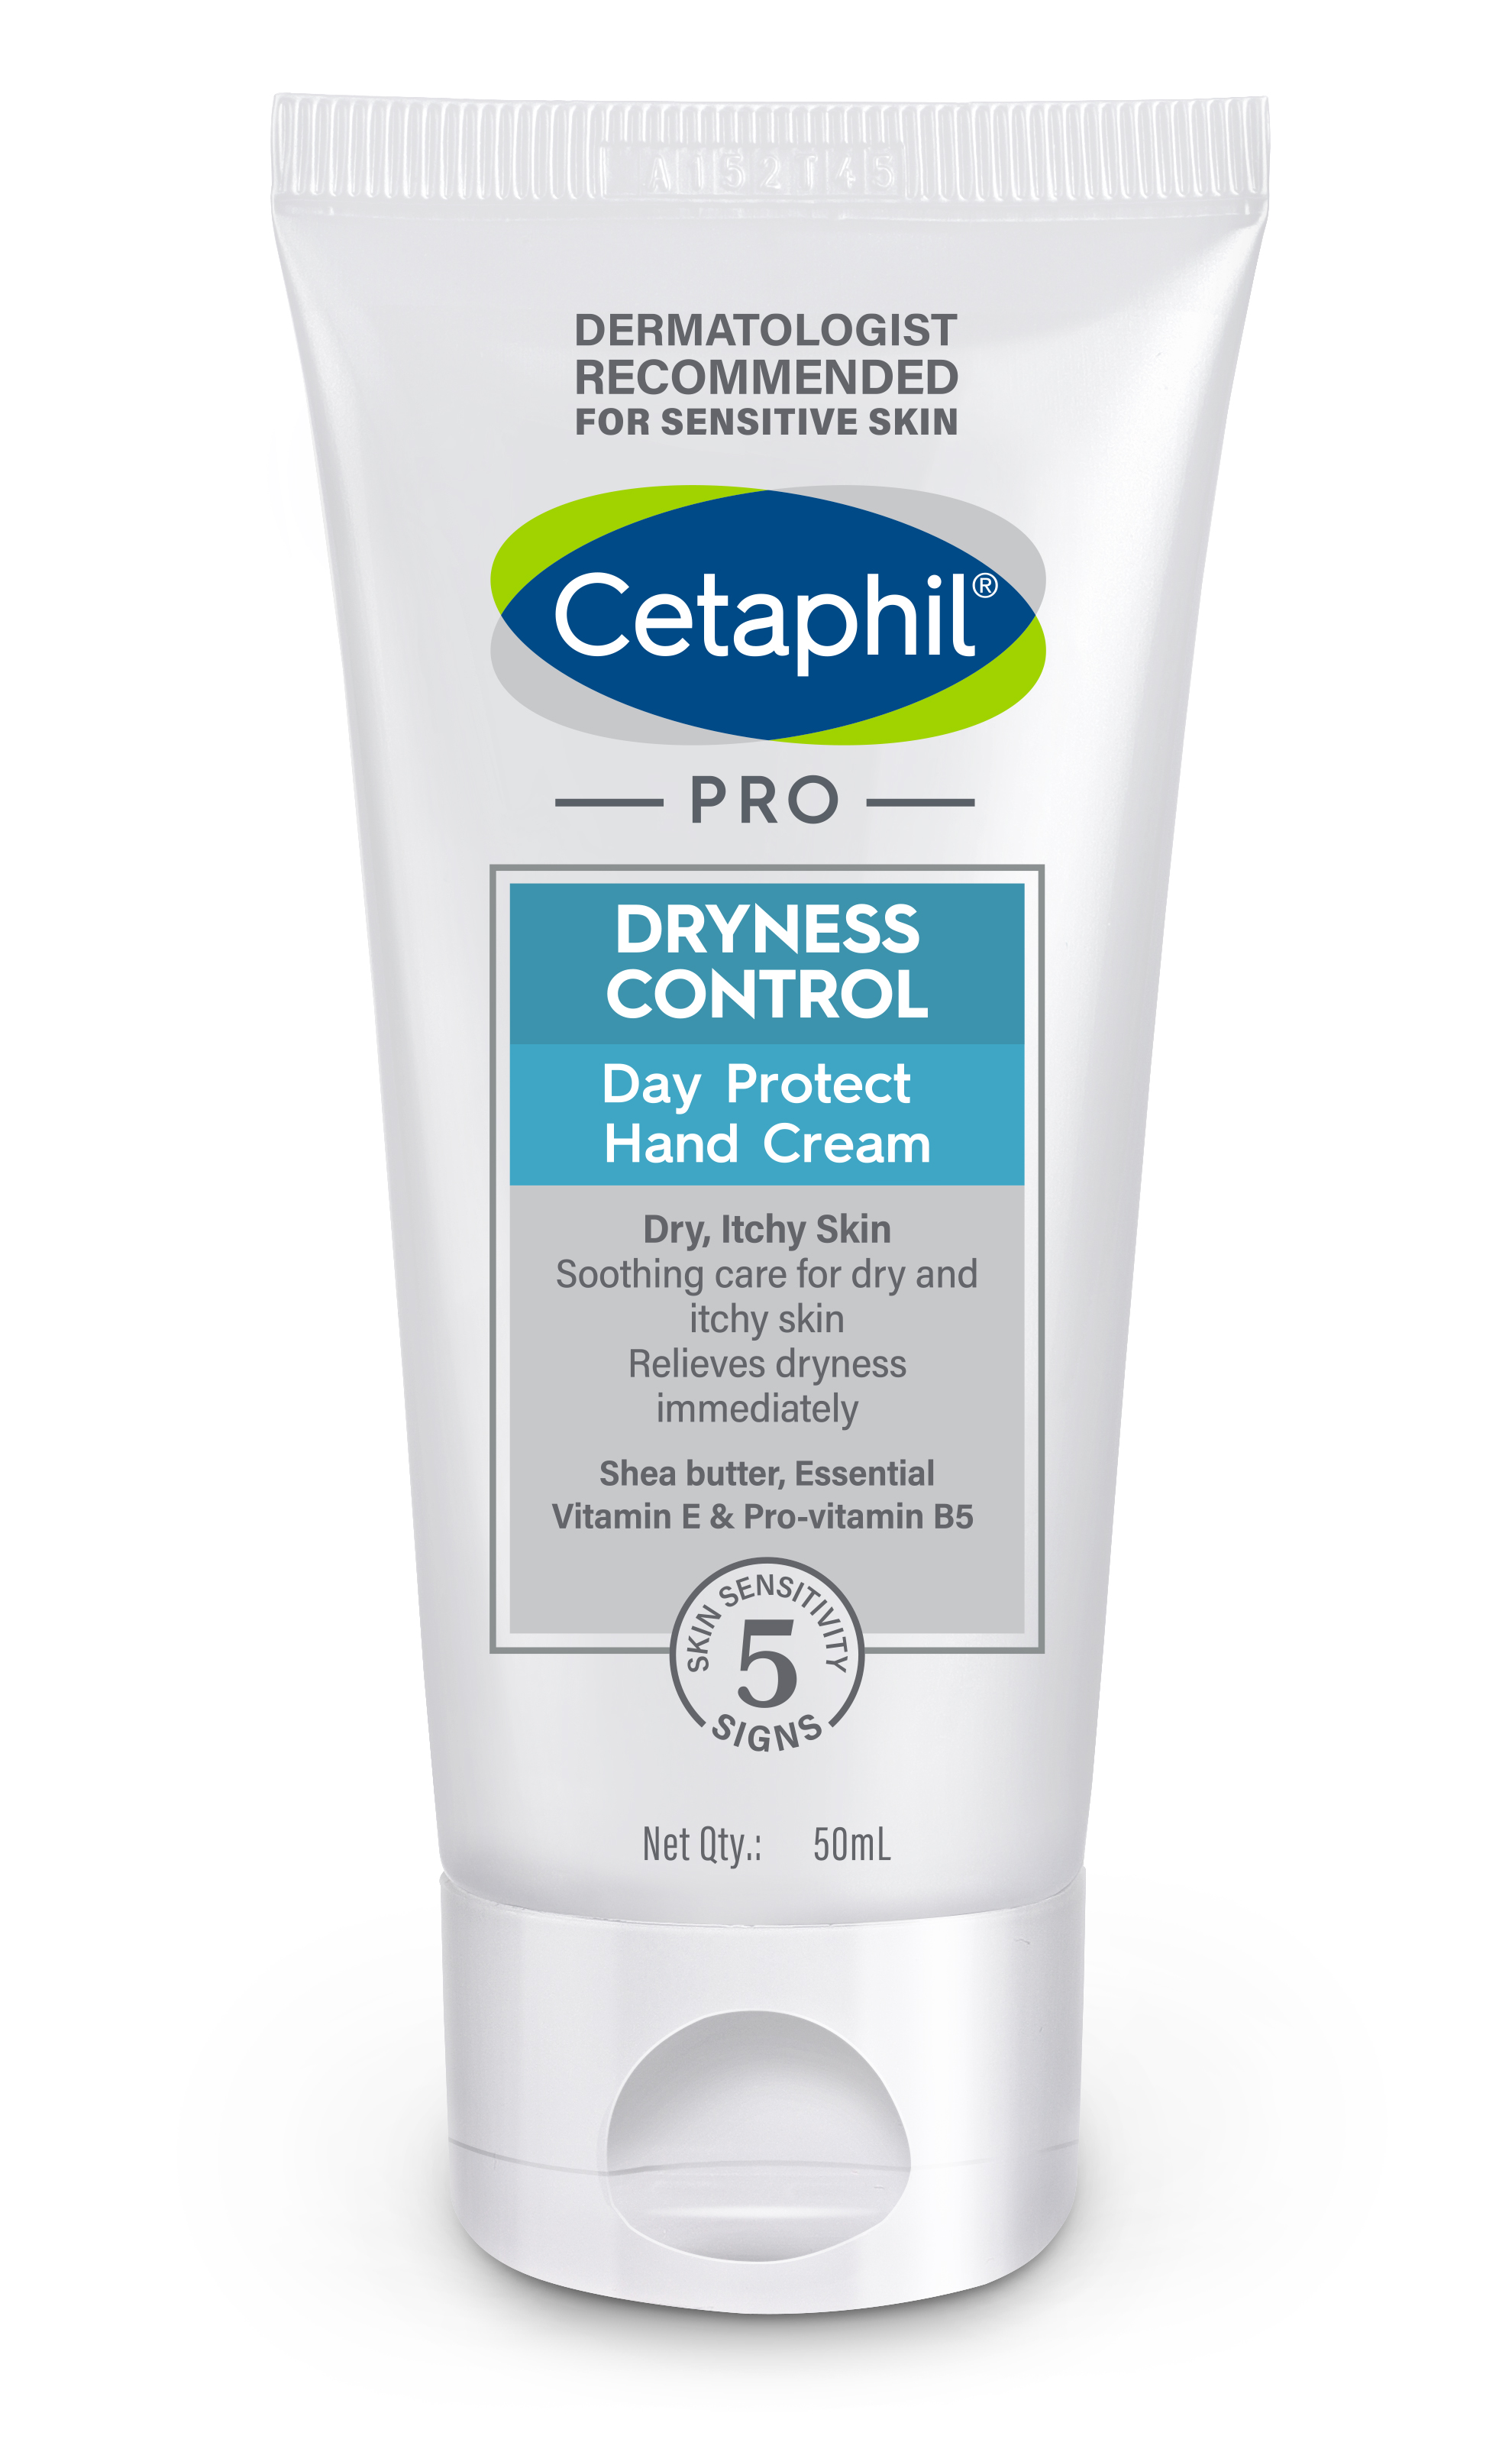 Cetaphil PRO Dryness Control Day Protect Hand Cream